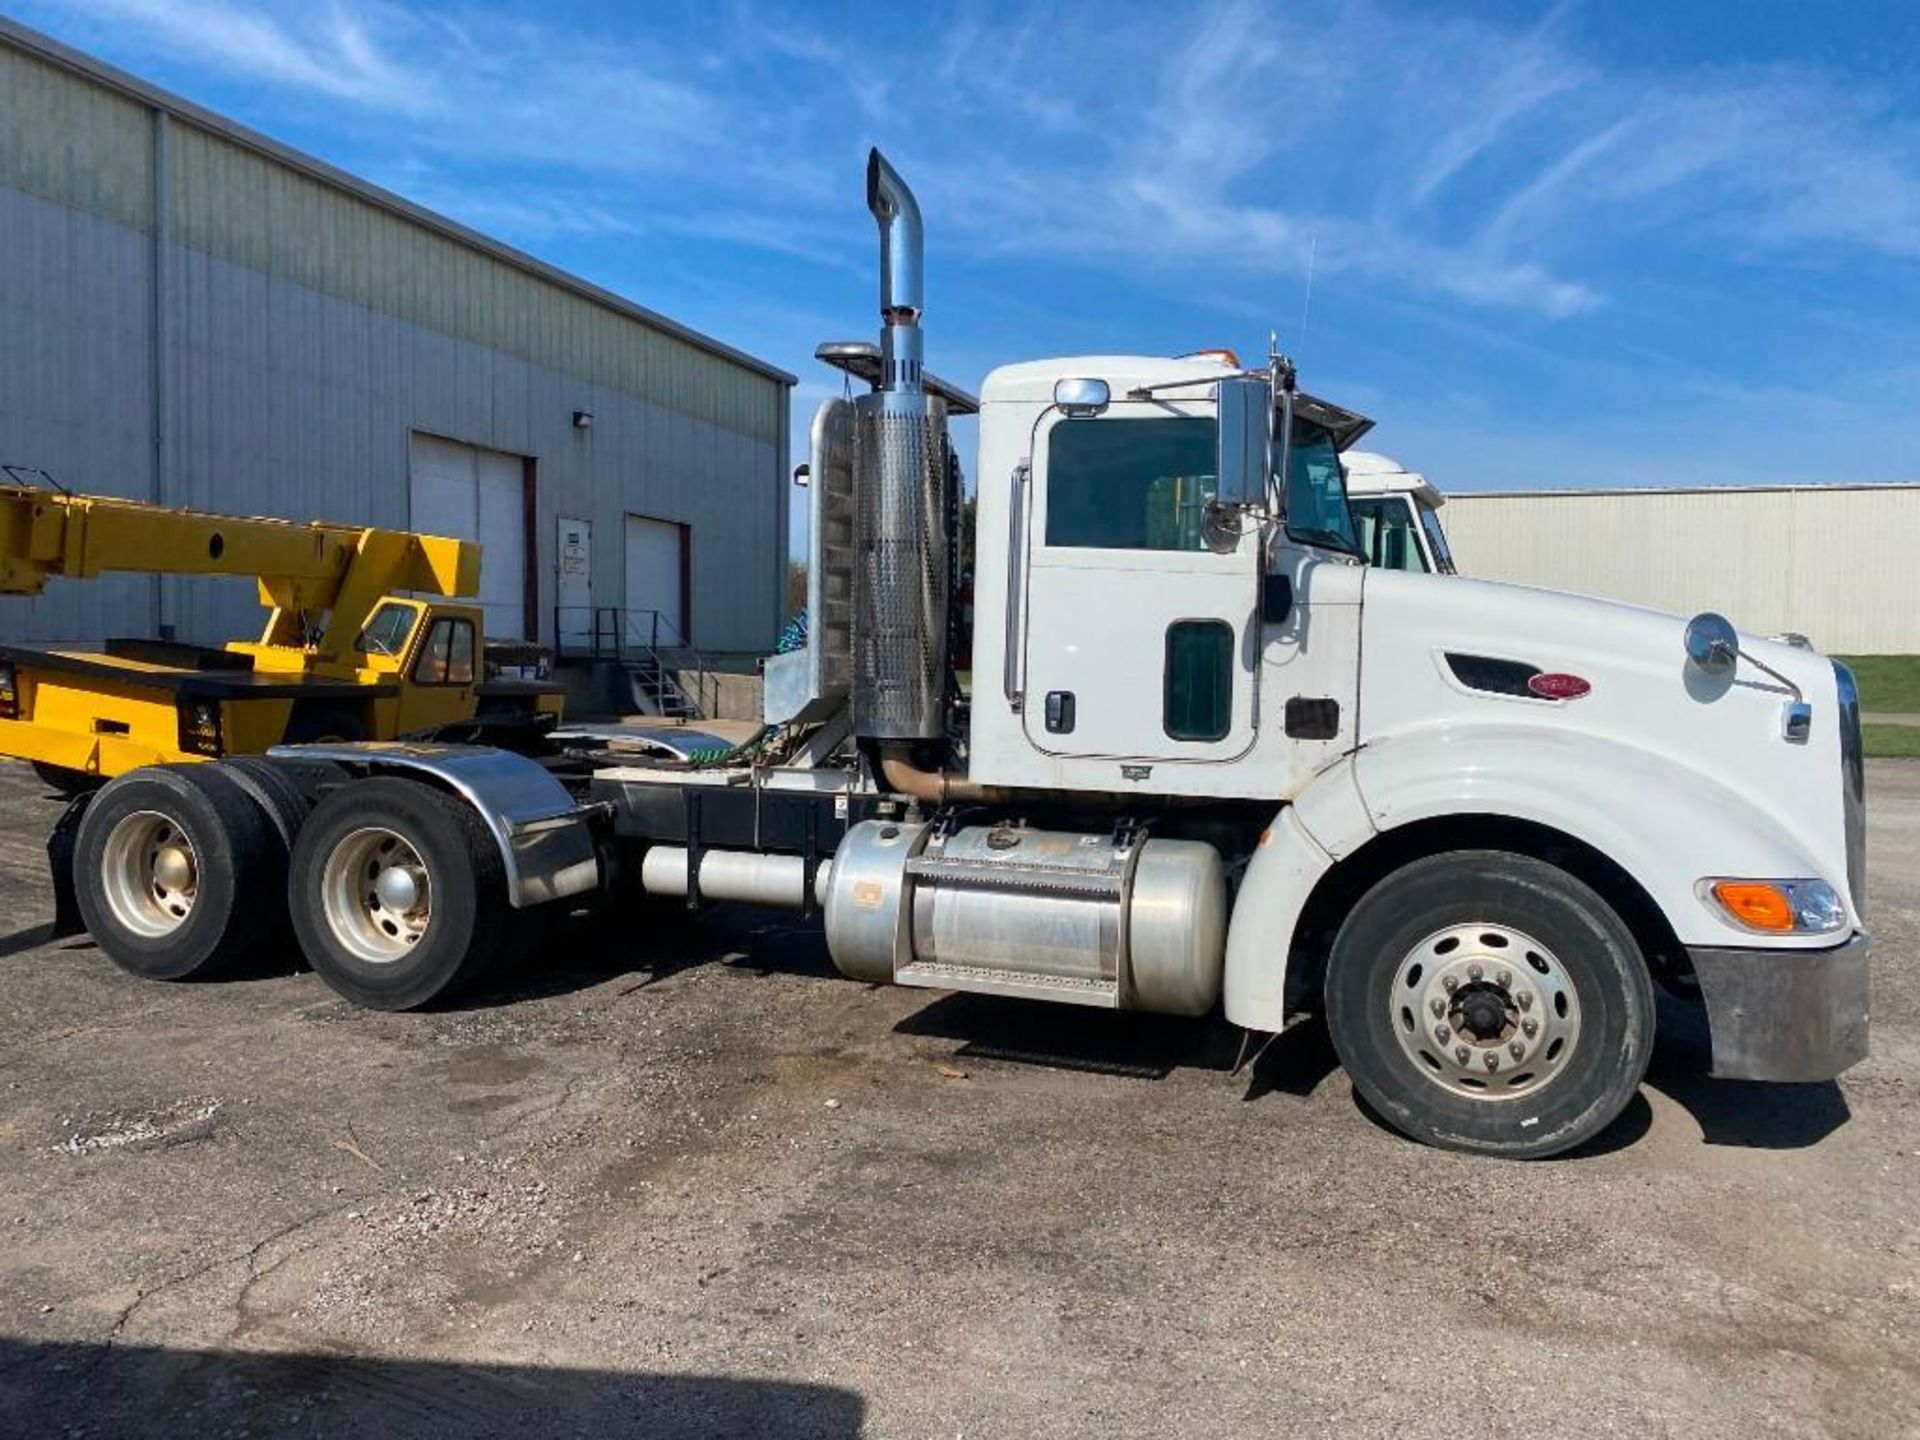 2009 Peterbilt Tandem Axle Tractor, Model 386, Vin 1XP-HD49X-7-9D785989, Chassis WT 15388, 170,815 M - Image 4 of 10